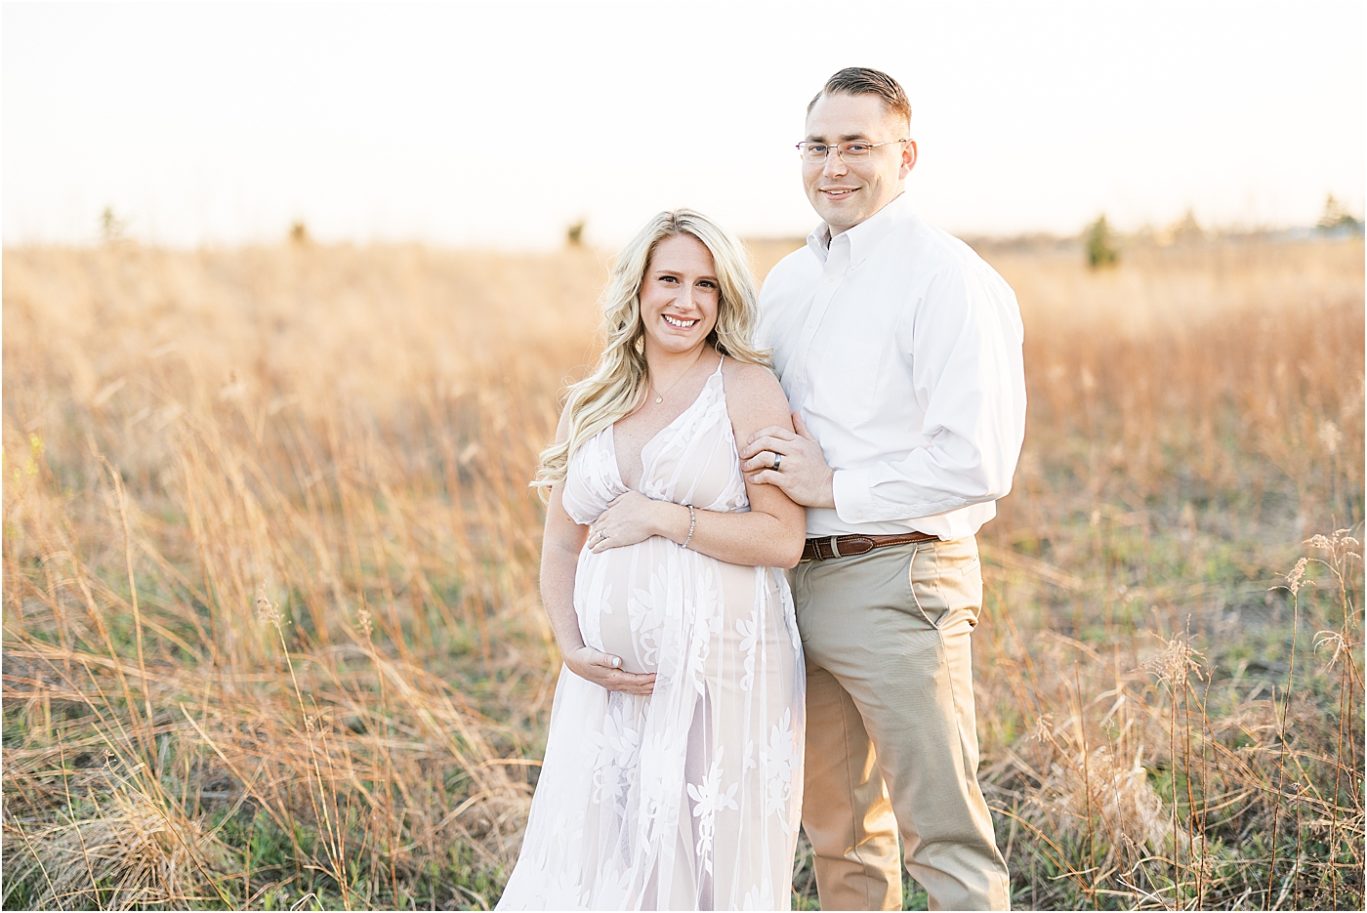 Couple takes maternity photos to celebrate first pregnancy. Photo by Lindsay Konopa Photography.